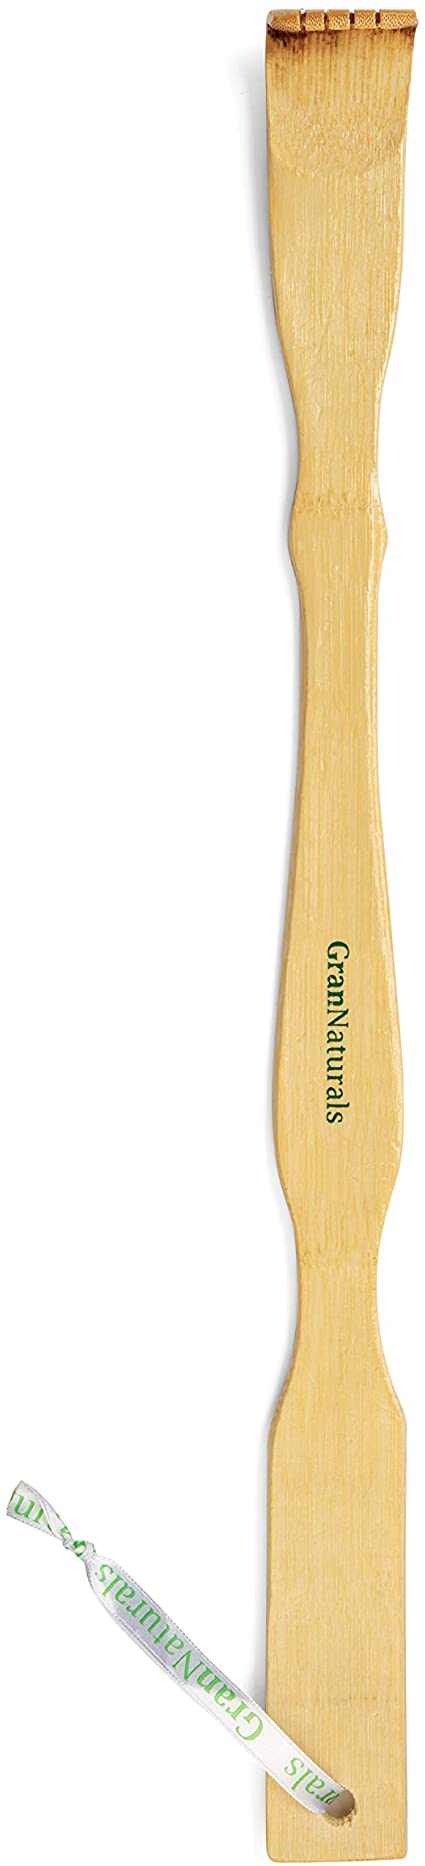 GranNaturals Bamboo Back Scratcher - Long Wooden Claw for Scratching Hard-to-Reach Itchy Spot - Lightweight Therapeutic Massage & Relaxation Scratch Tool - Strong & Heavy-Duty Handle with Hang Loop